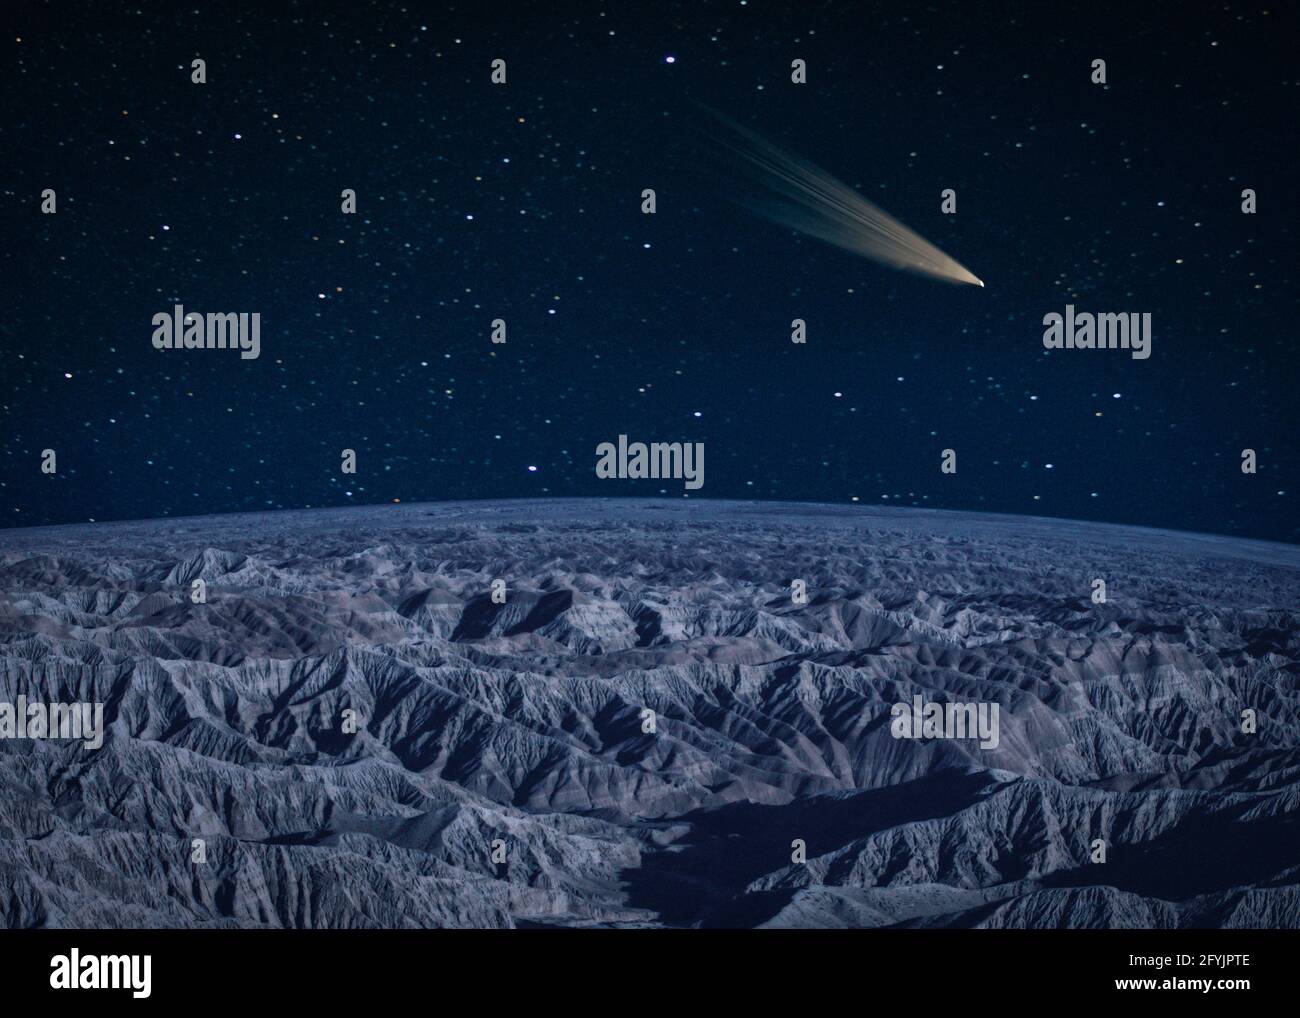 Comet passing over a barren mountain landscape Stock Photo